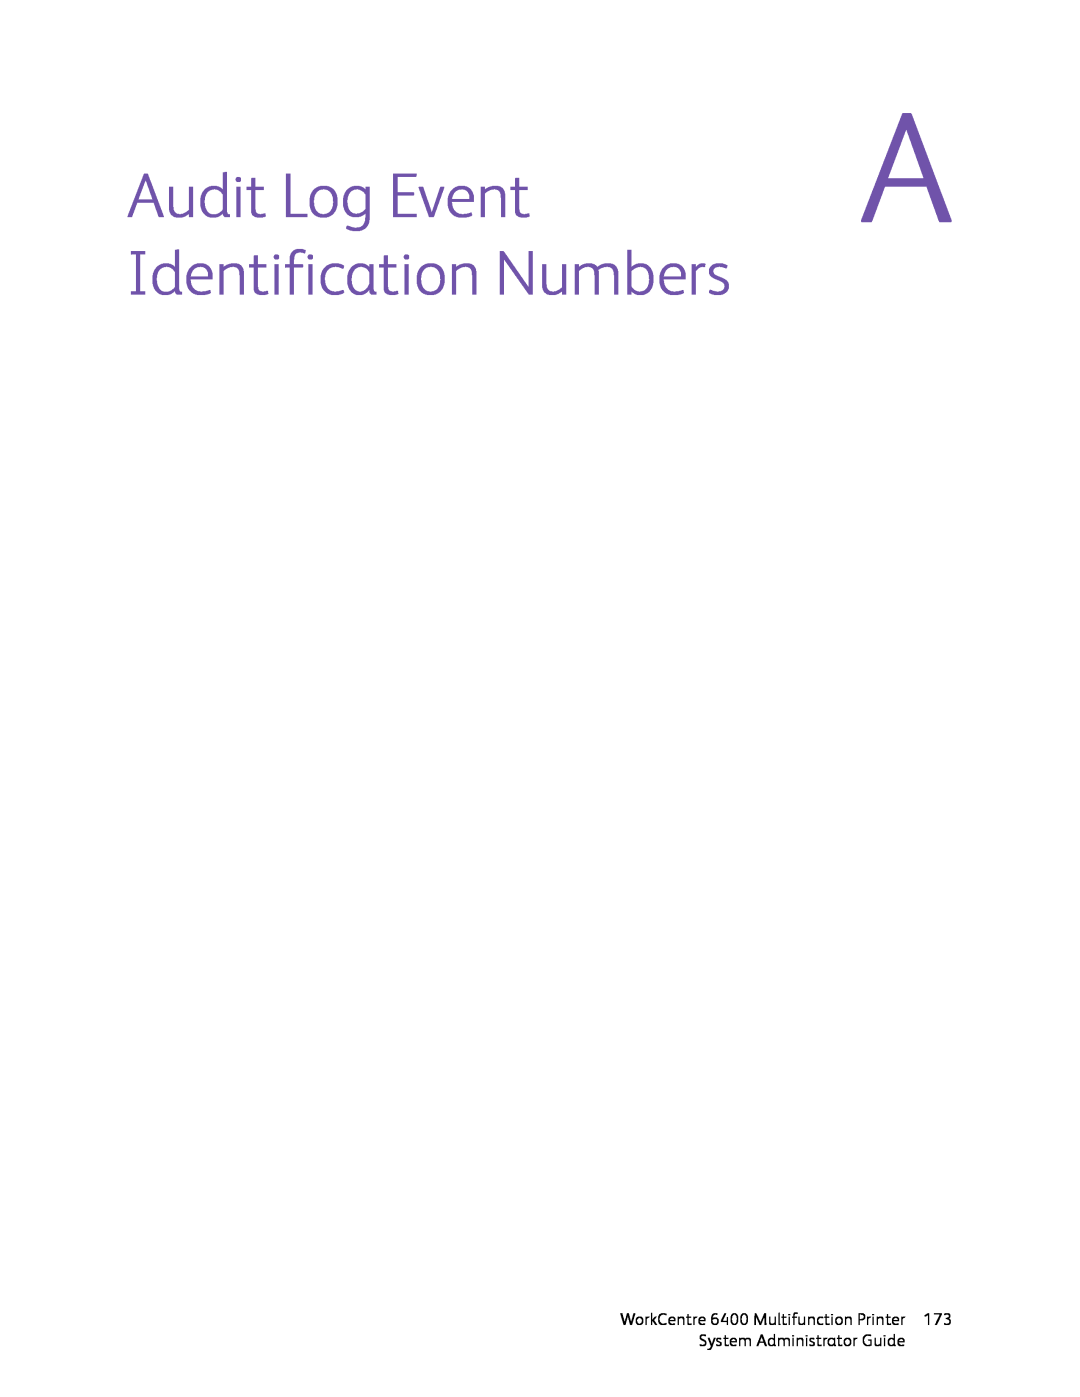 Xerox 6400 manual Audit Log Event, Identification Numbers 